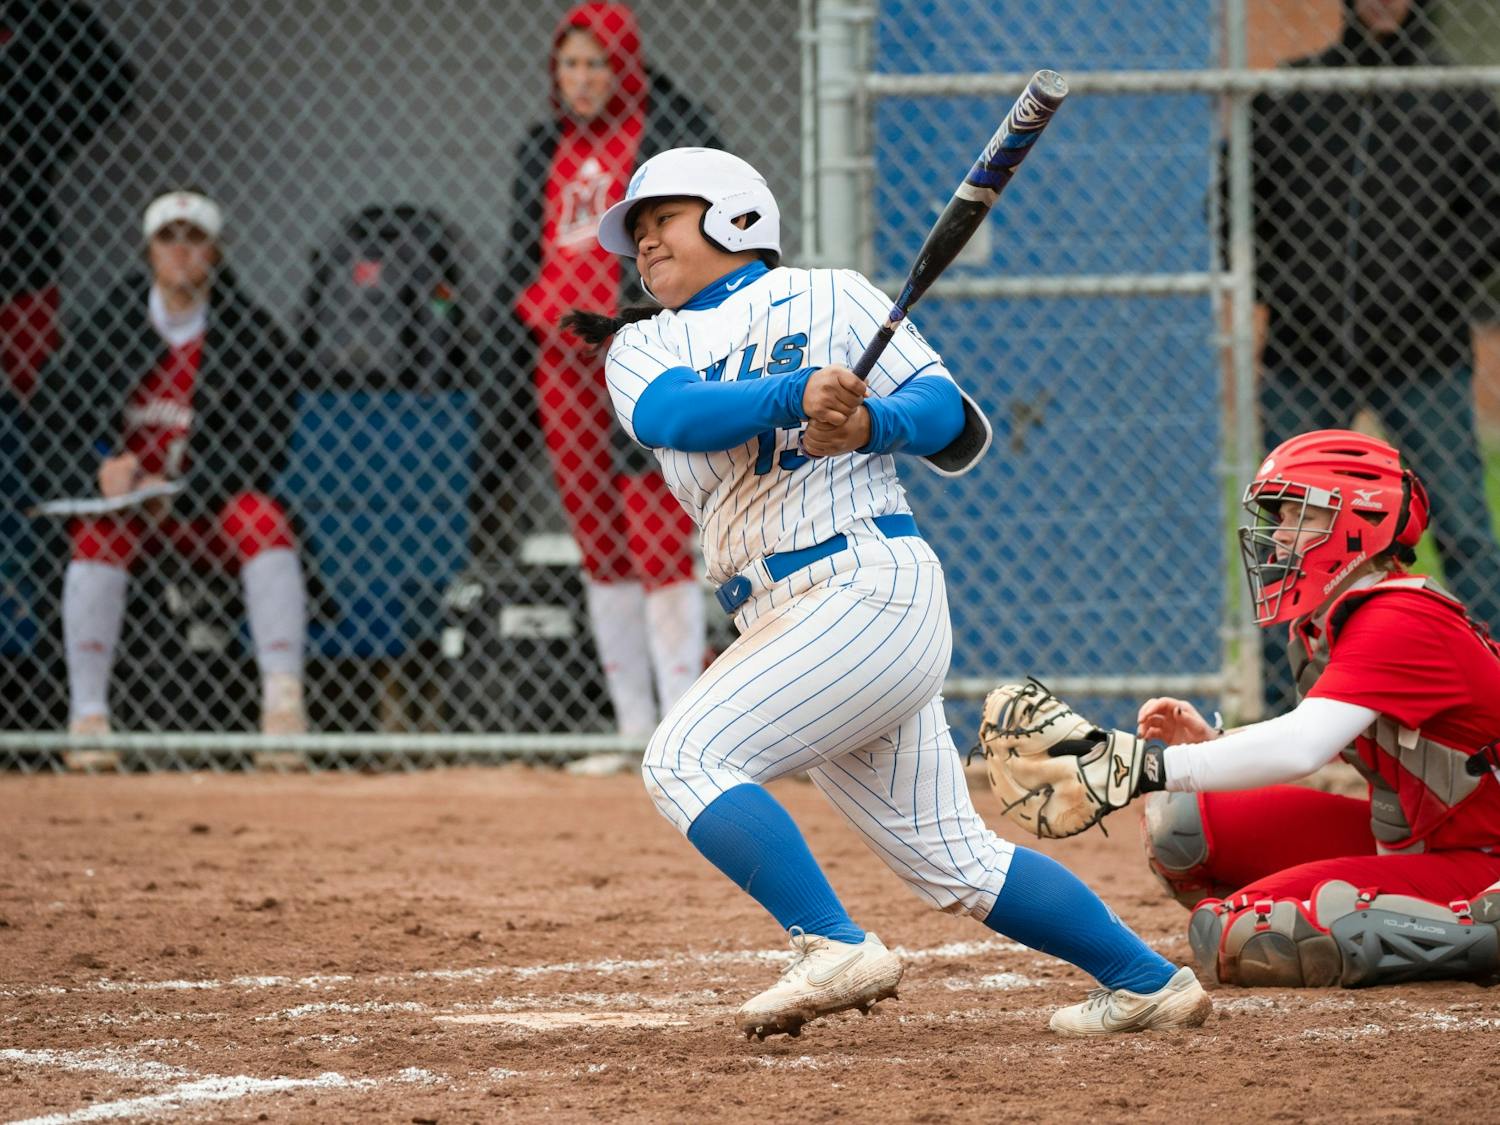 Graduate student utility player Anna Aguon connects with a pitch during a recent game against Miami (OH).